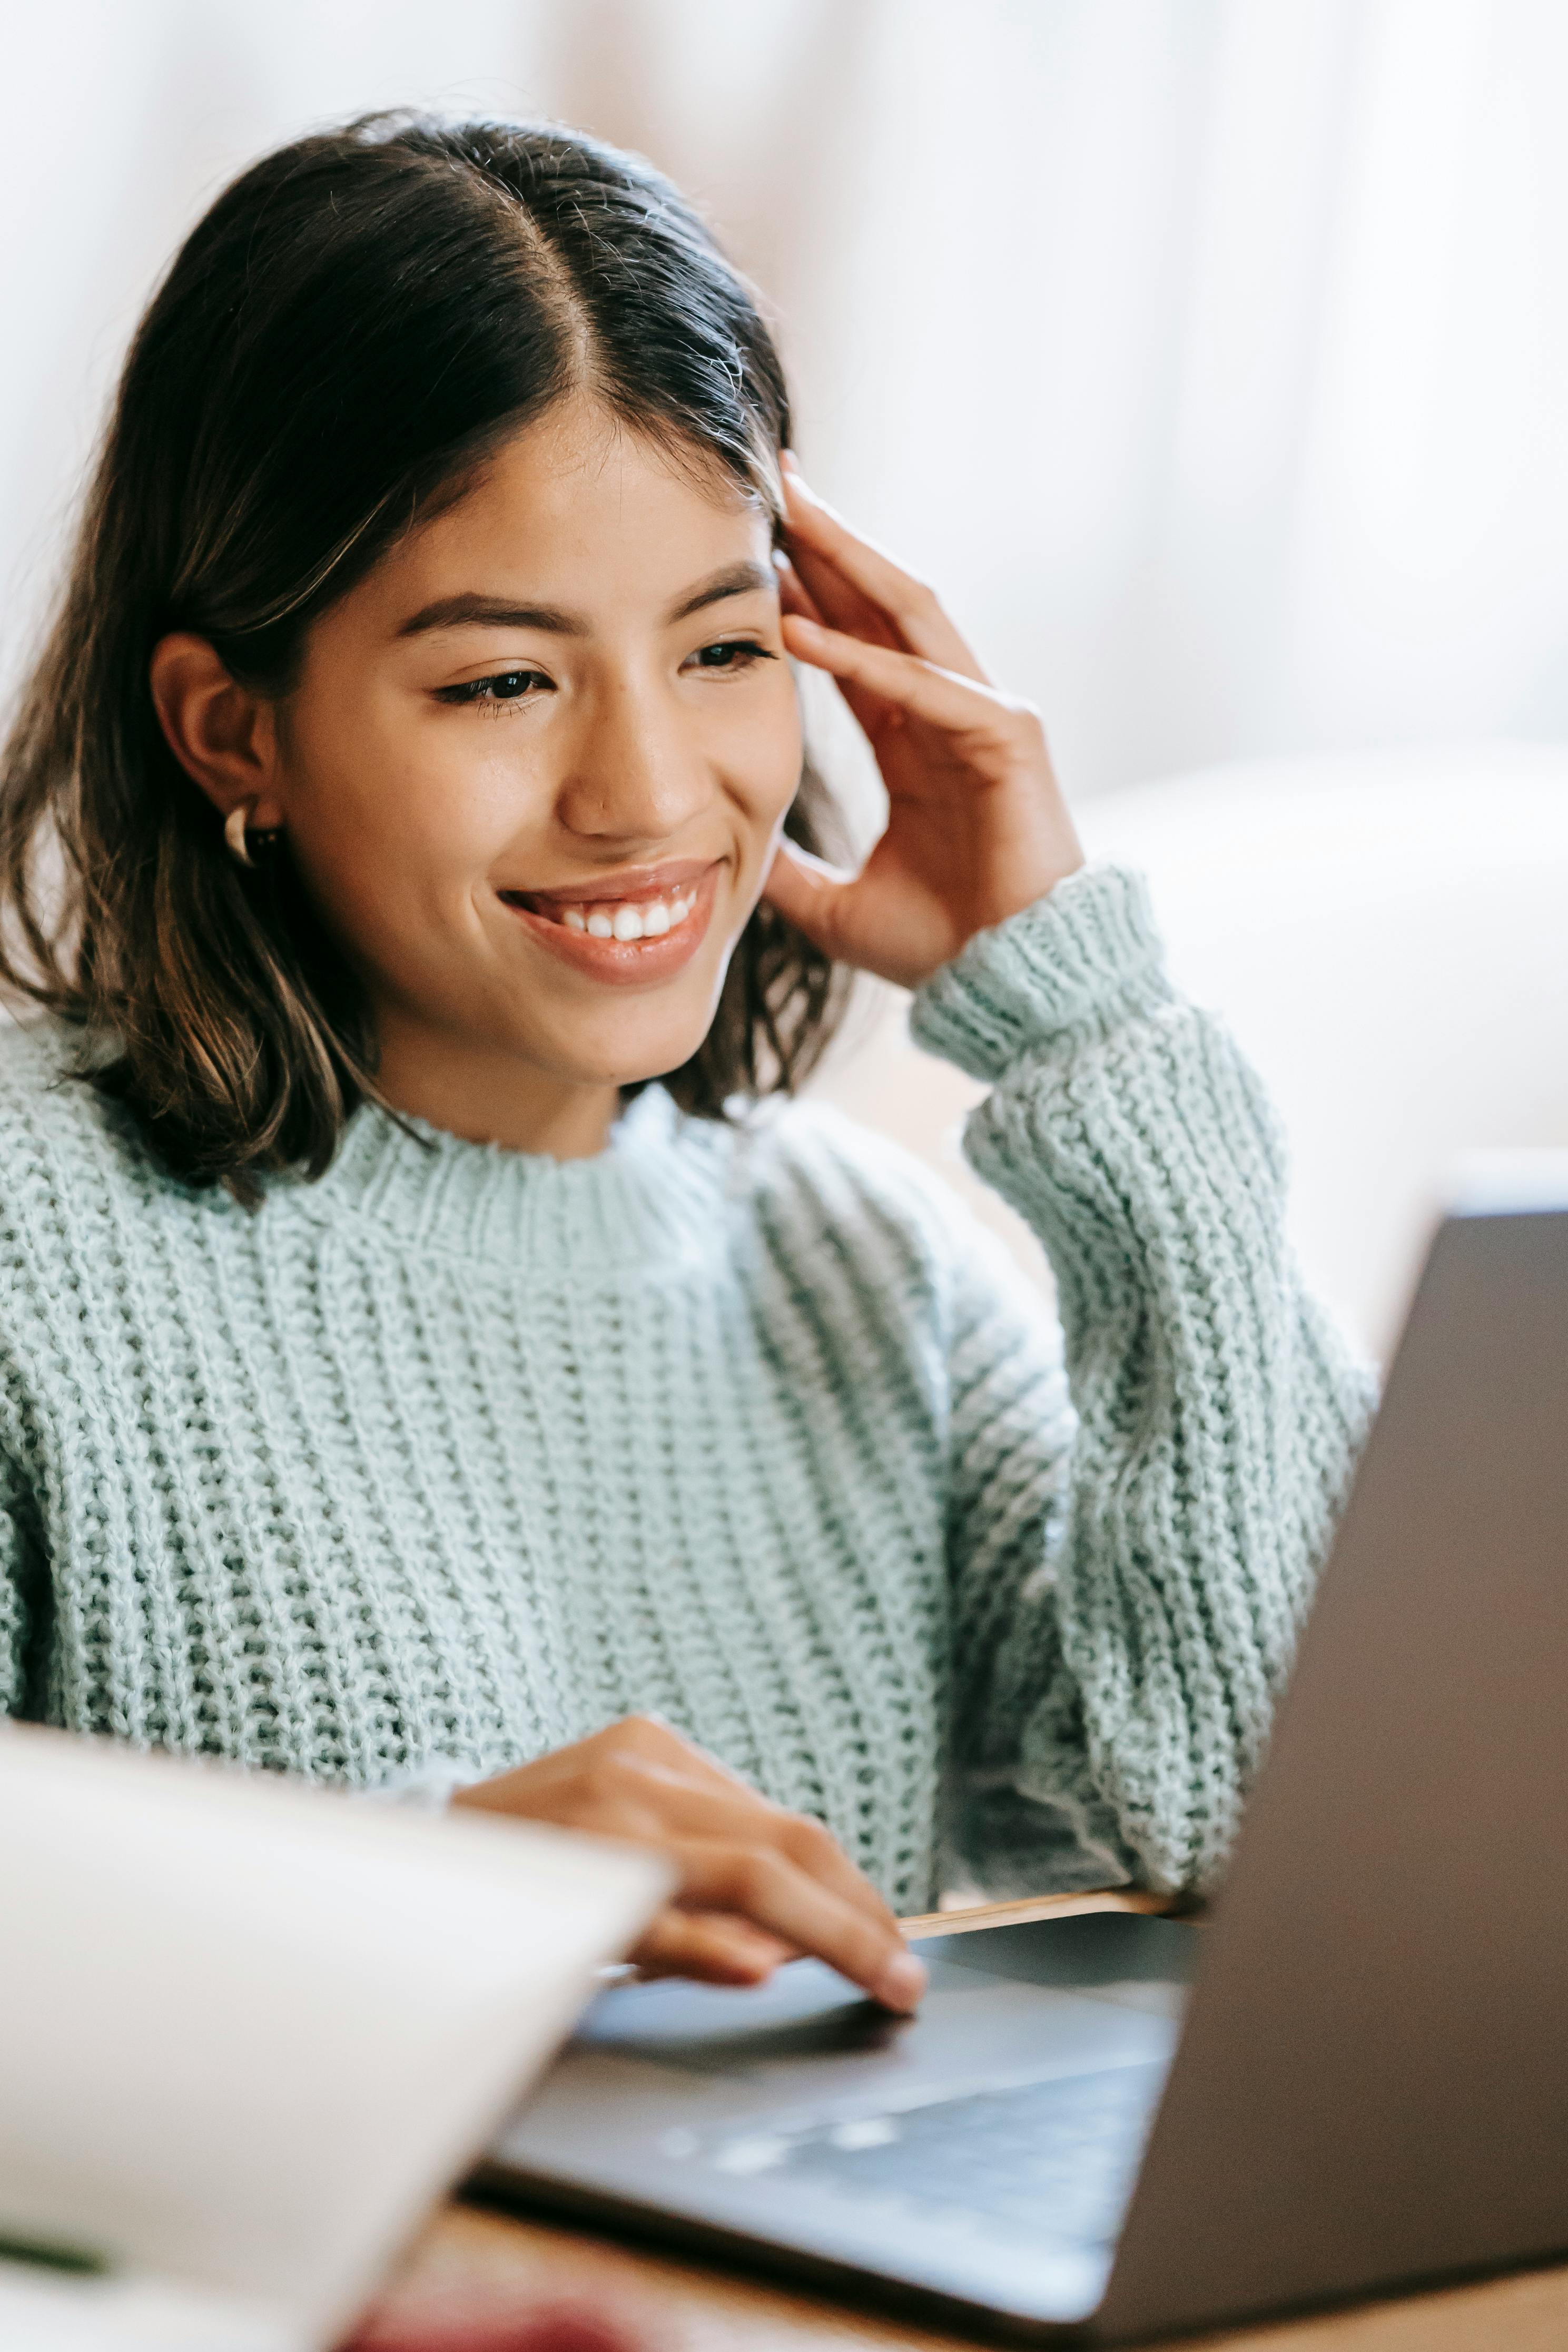 Image of lady smiling at her laptop